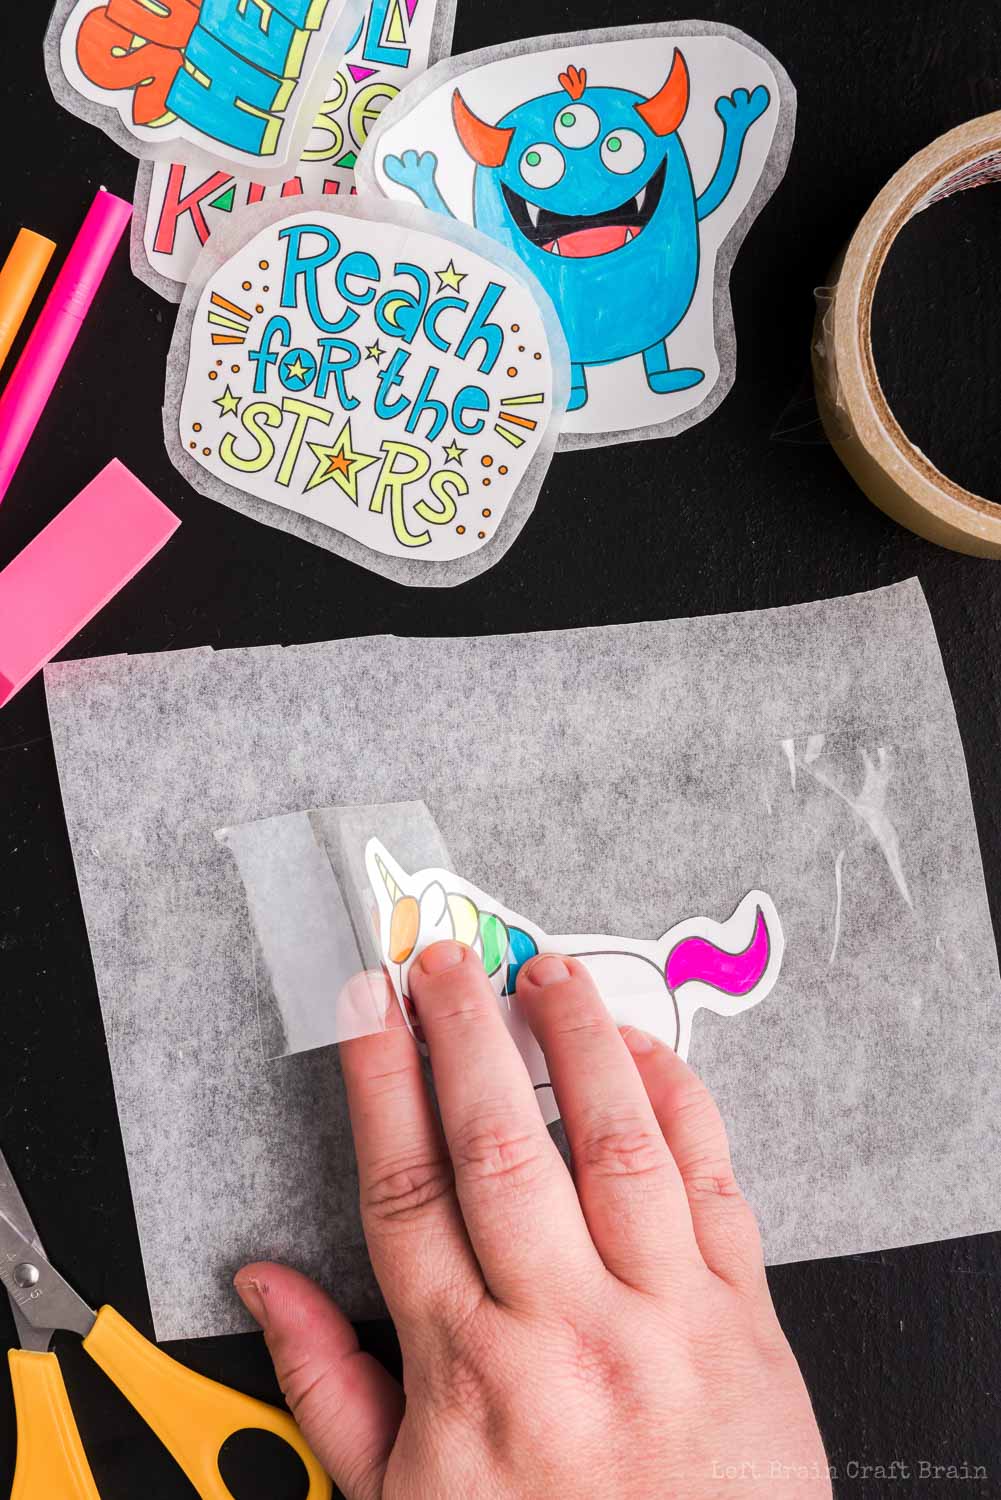 Place clear tape over design - Make your own DIY stickers with a super easy process using basic supplies. Kids will love this activity. They're fun to add to presents, too.